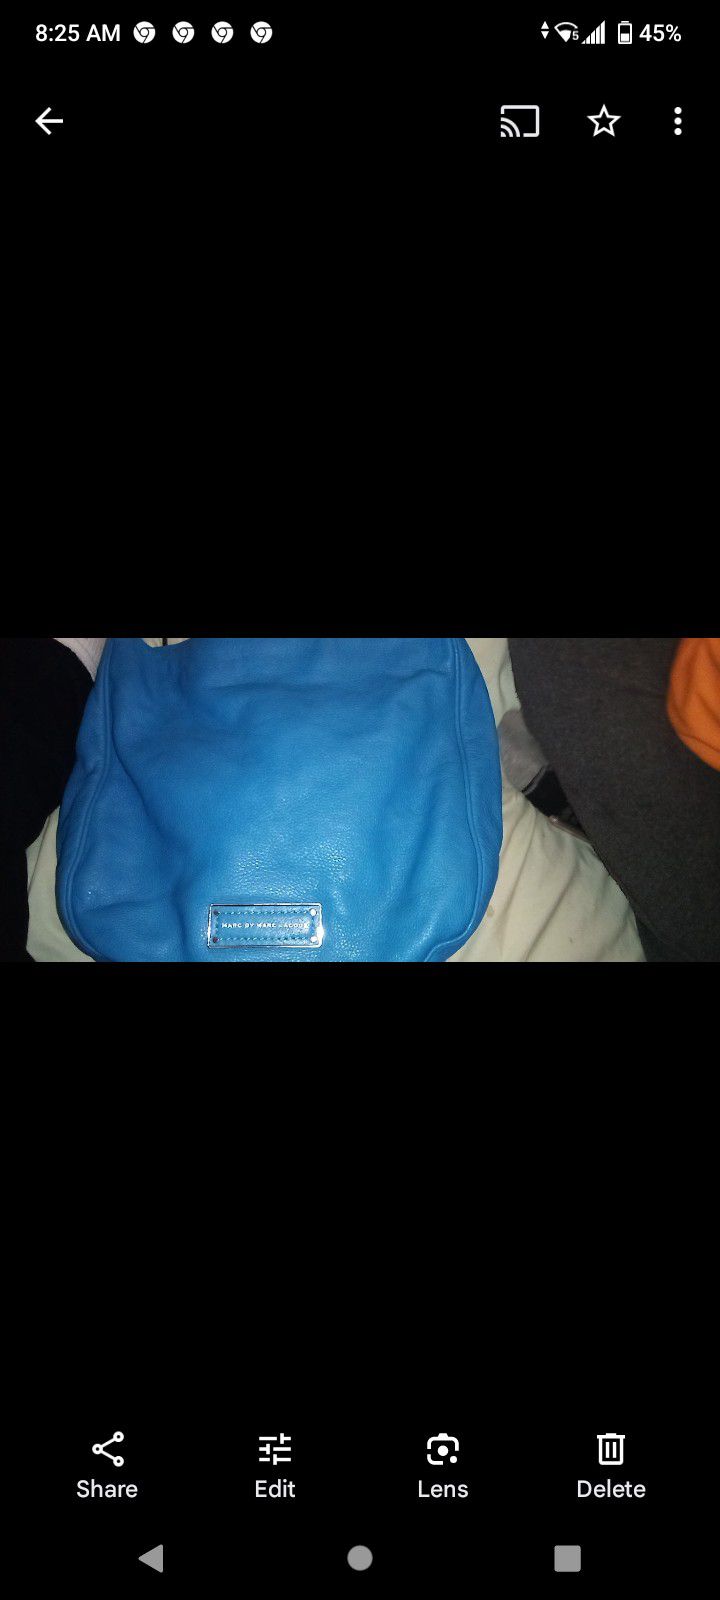 Pick up today !$60 brand new aquamarine color marc Jacobs authentic bag